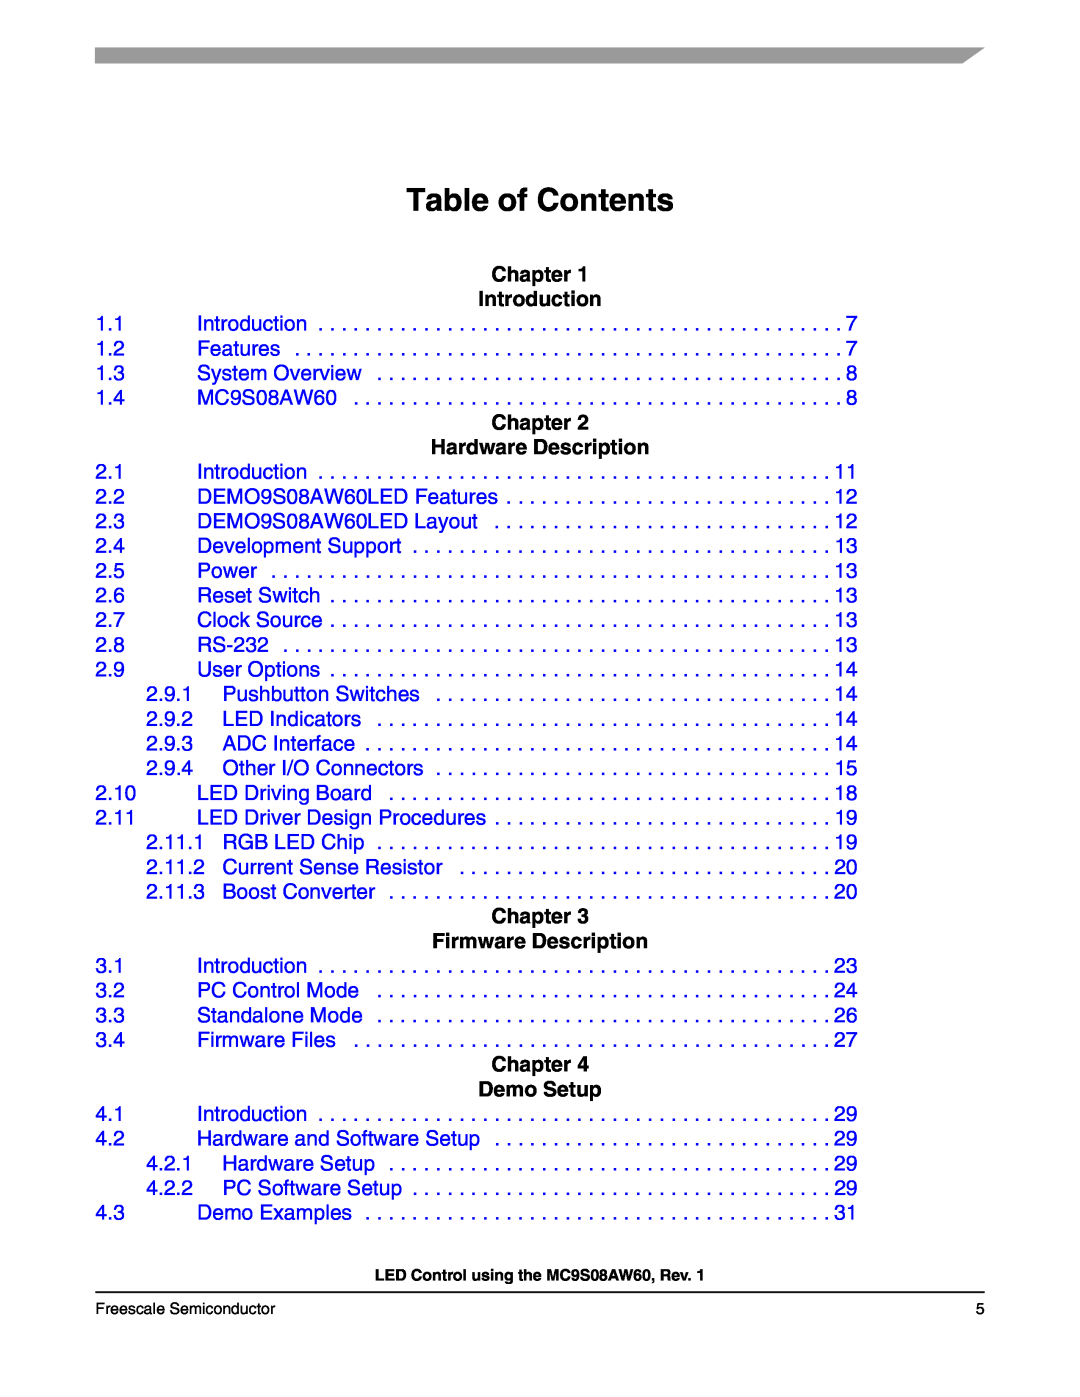 Freescale Semiconductor S08 manual Table of Contents, Chapter, Introduction, Hardware Description, Firmware Description 